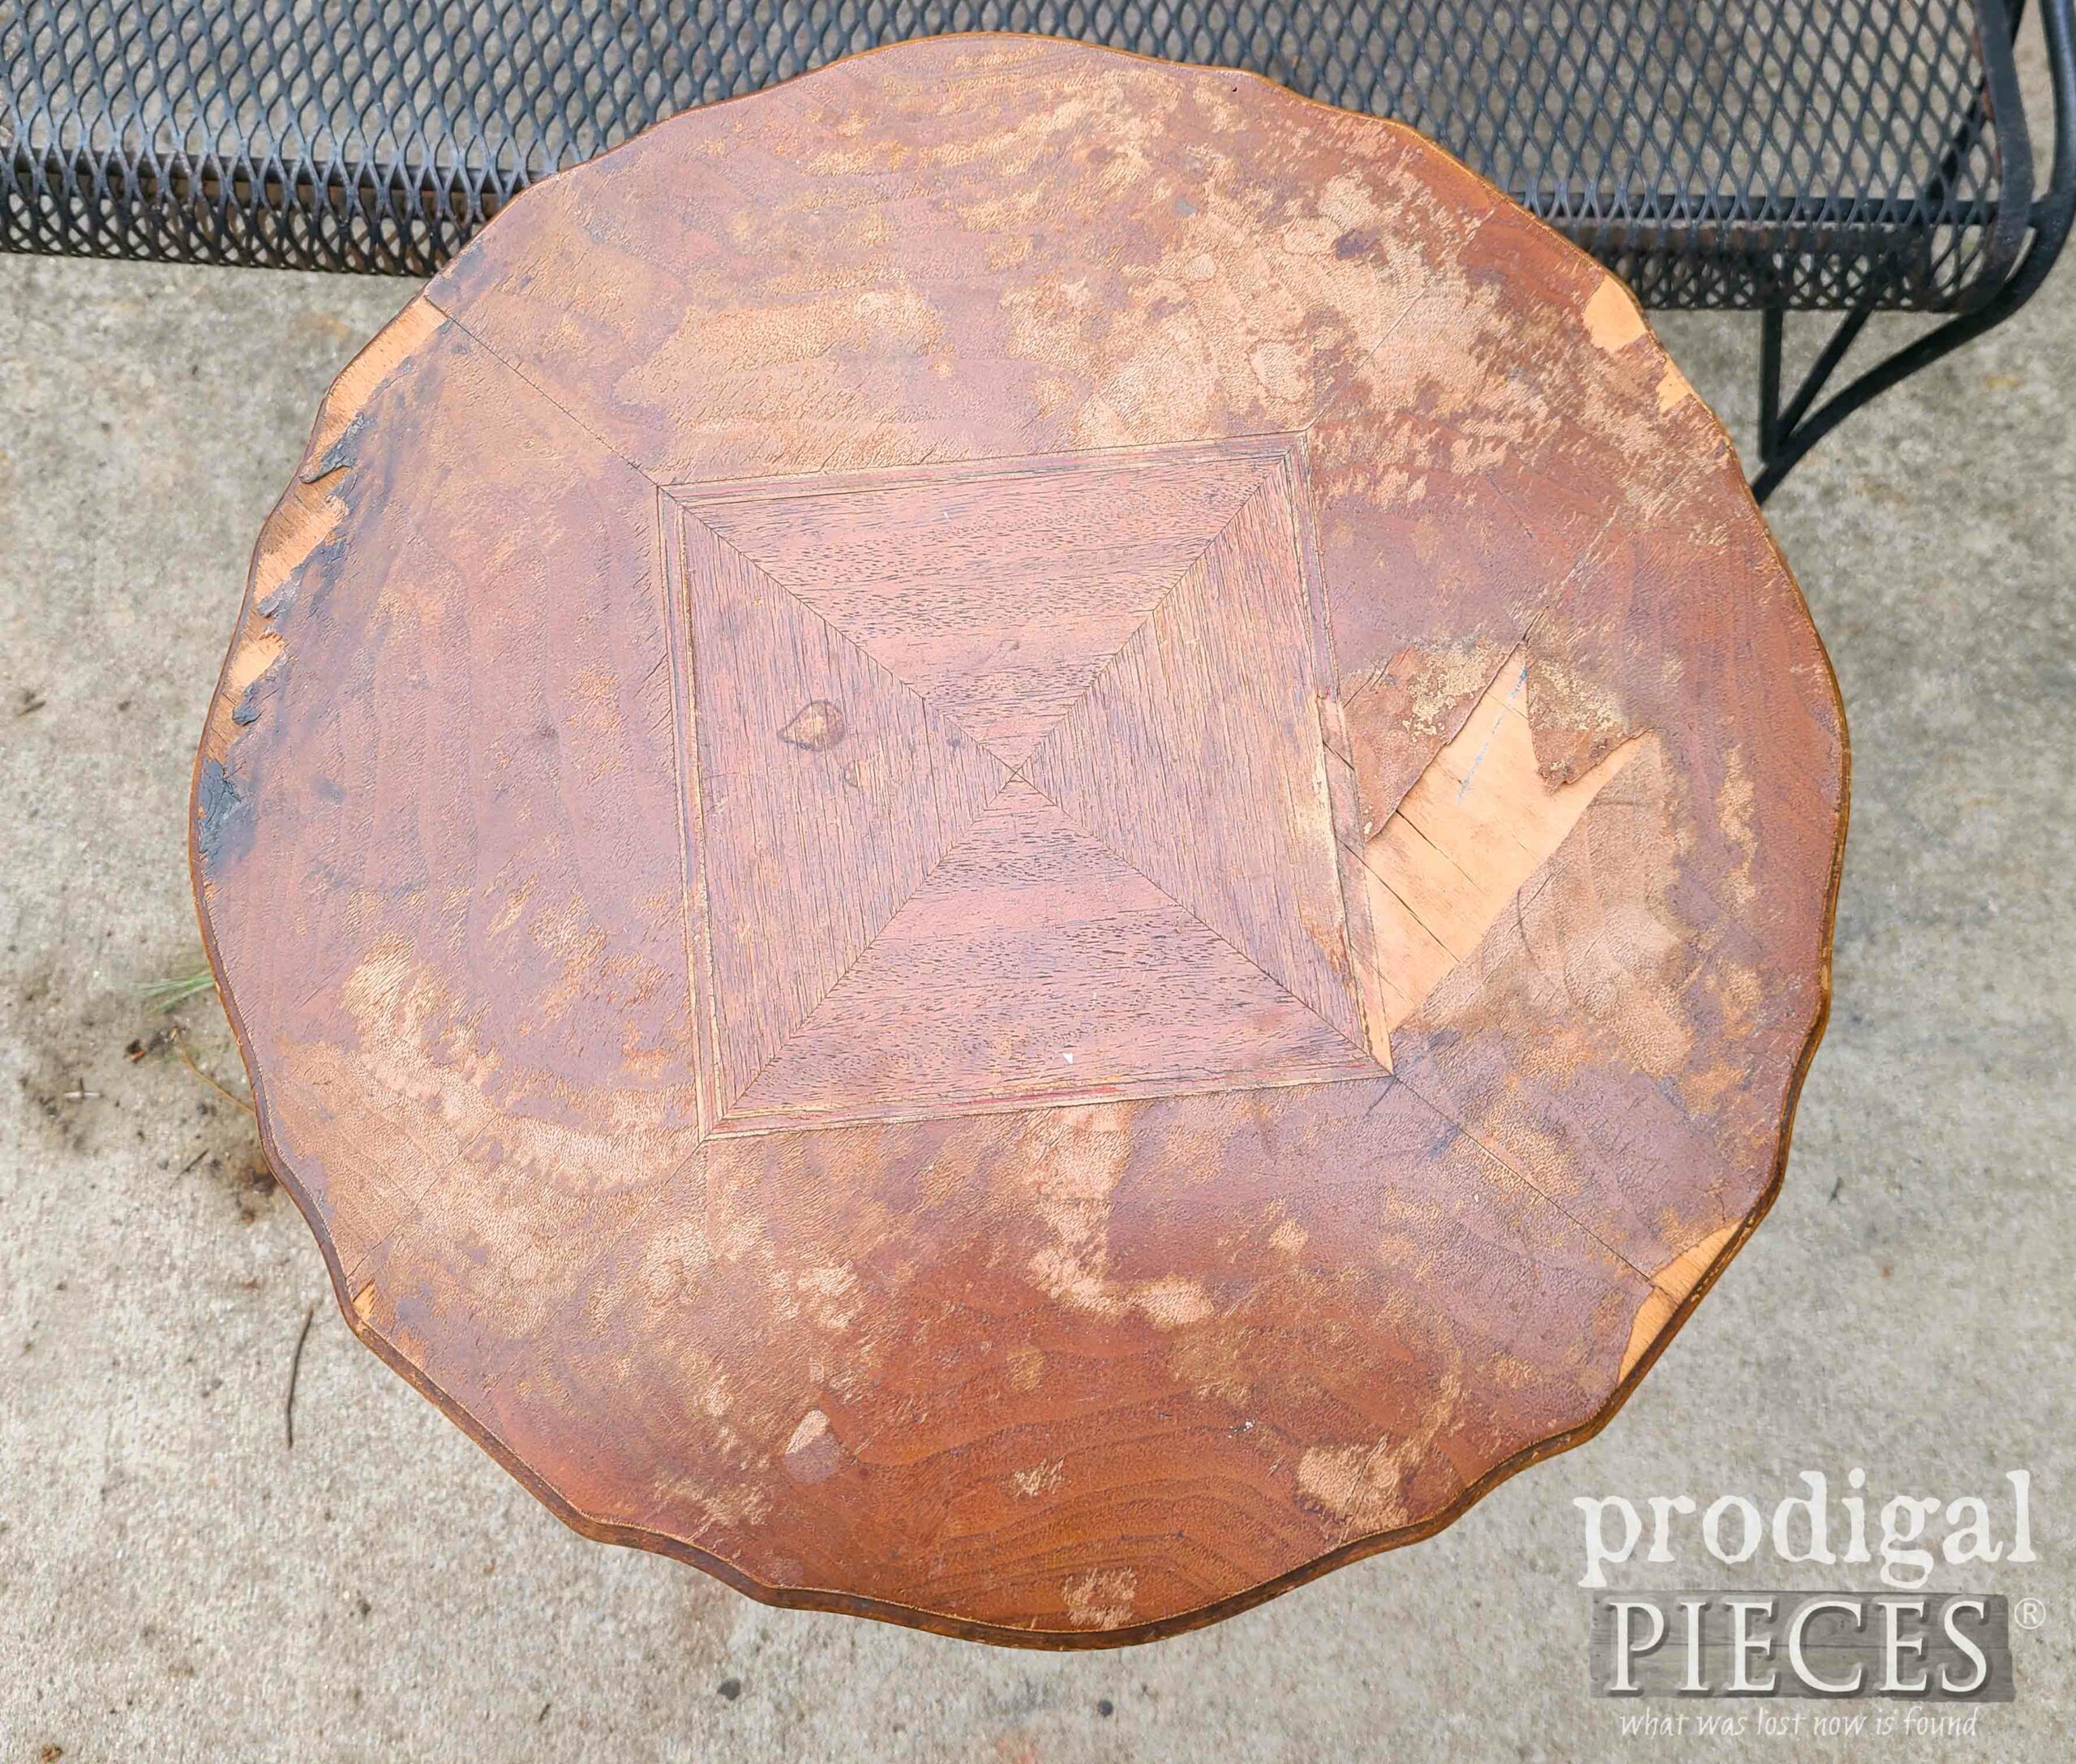 Damaged Side Table Top of Antique Side Table | prodigalpieces.com #prodigalpieces